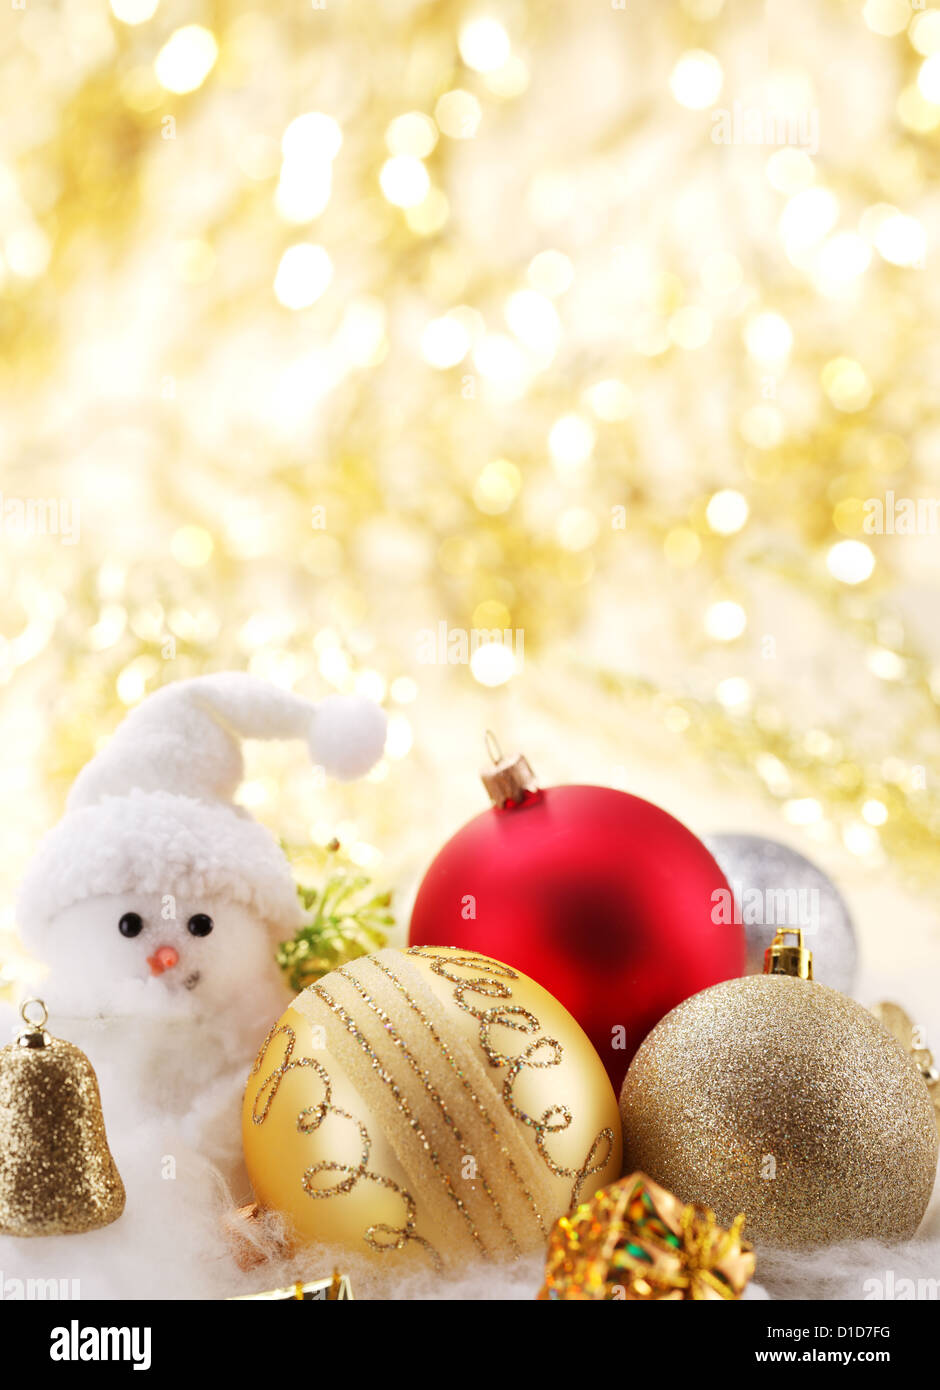 Christmas balls with a snowman Stock Photo